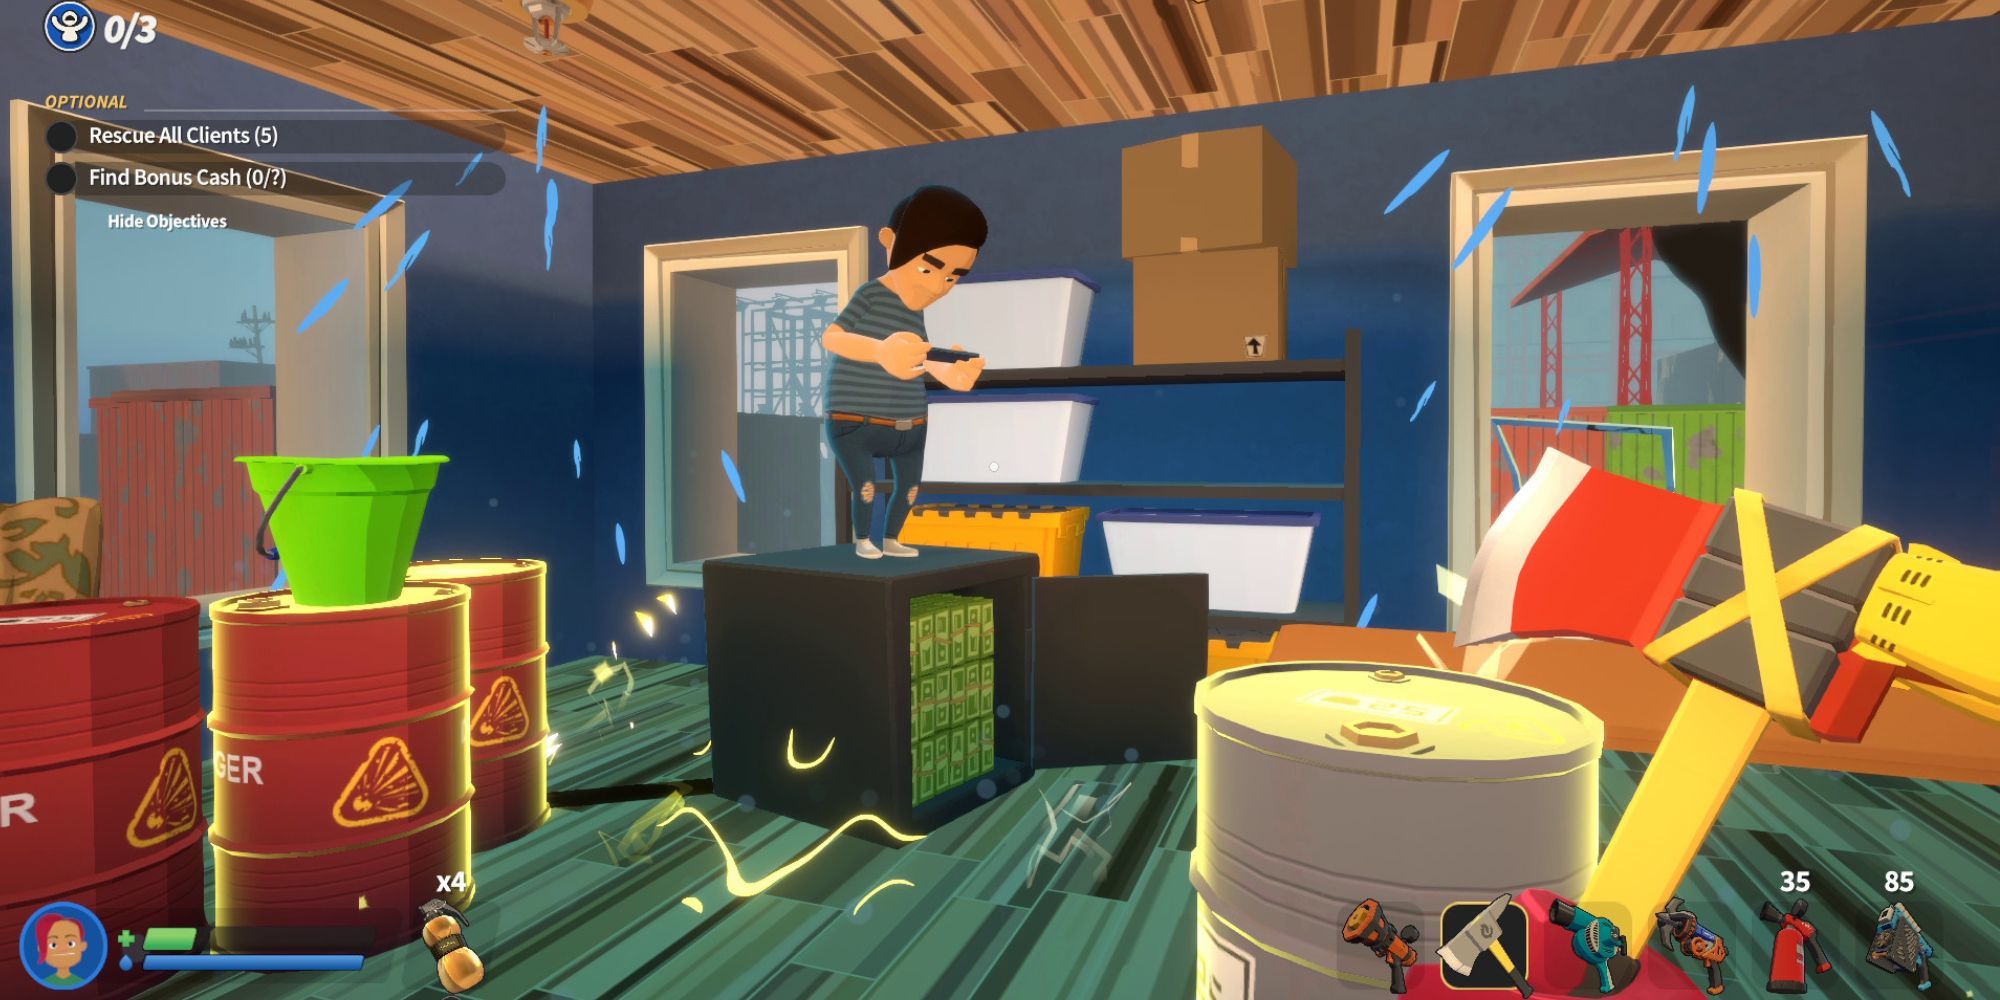 Embr a first-person perspective shot of a hand wielding an axe looking out at a man stood on top of a safe full of money surrounded by barrels and an electrified floor